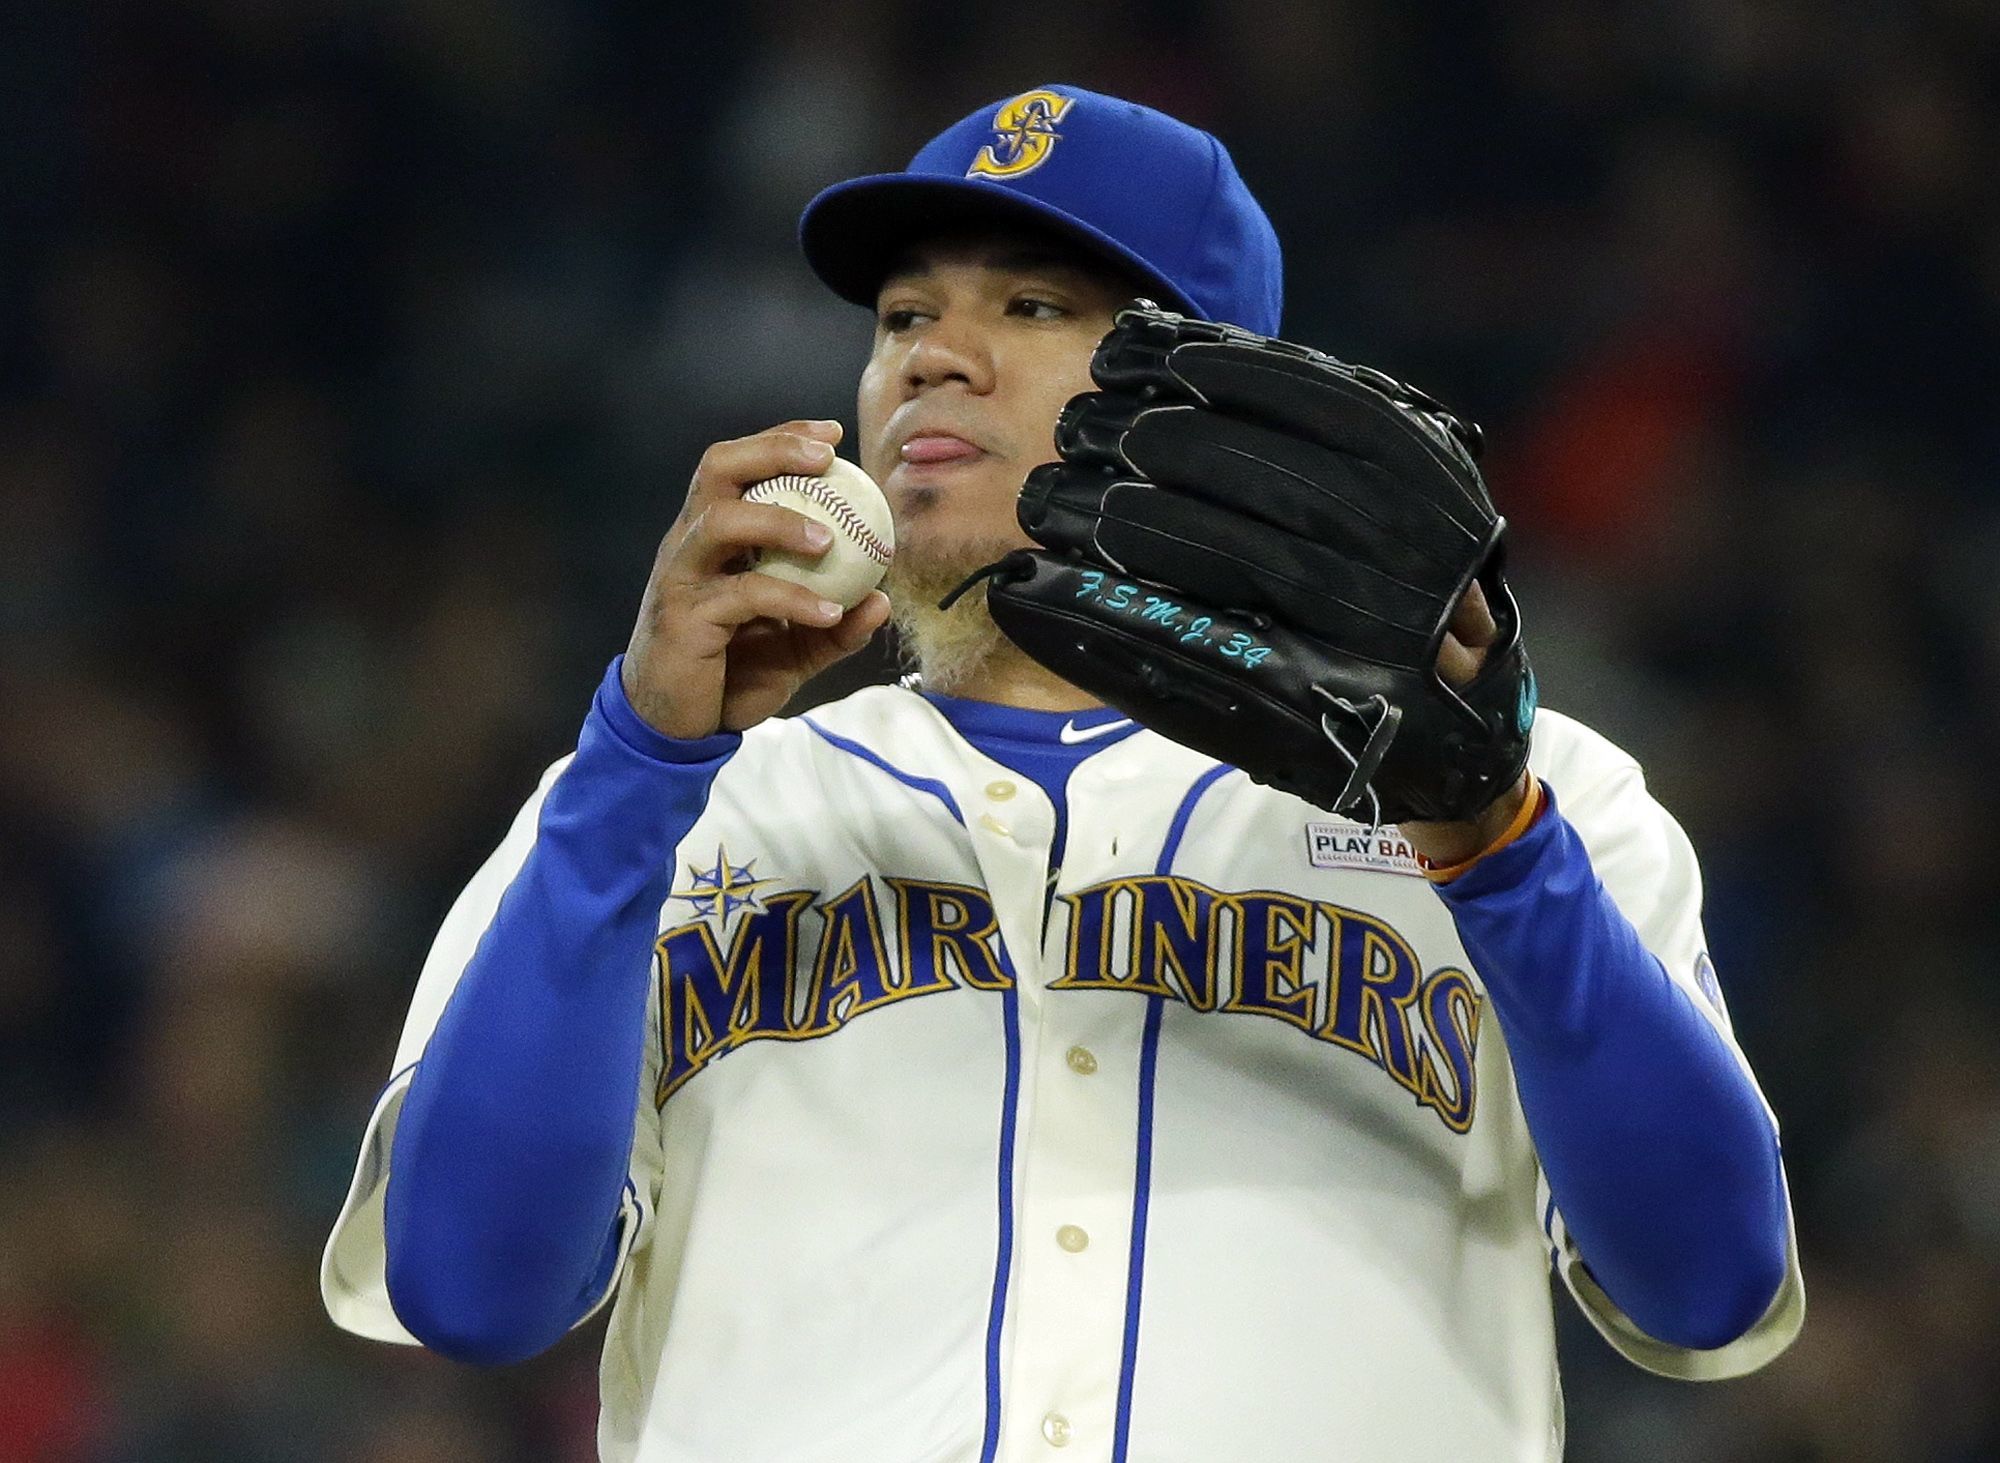 Mariners starting pitcher Felix Hernandez throws during a game against the Los Angeles Angels on May 15 in Seattle.